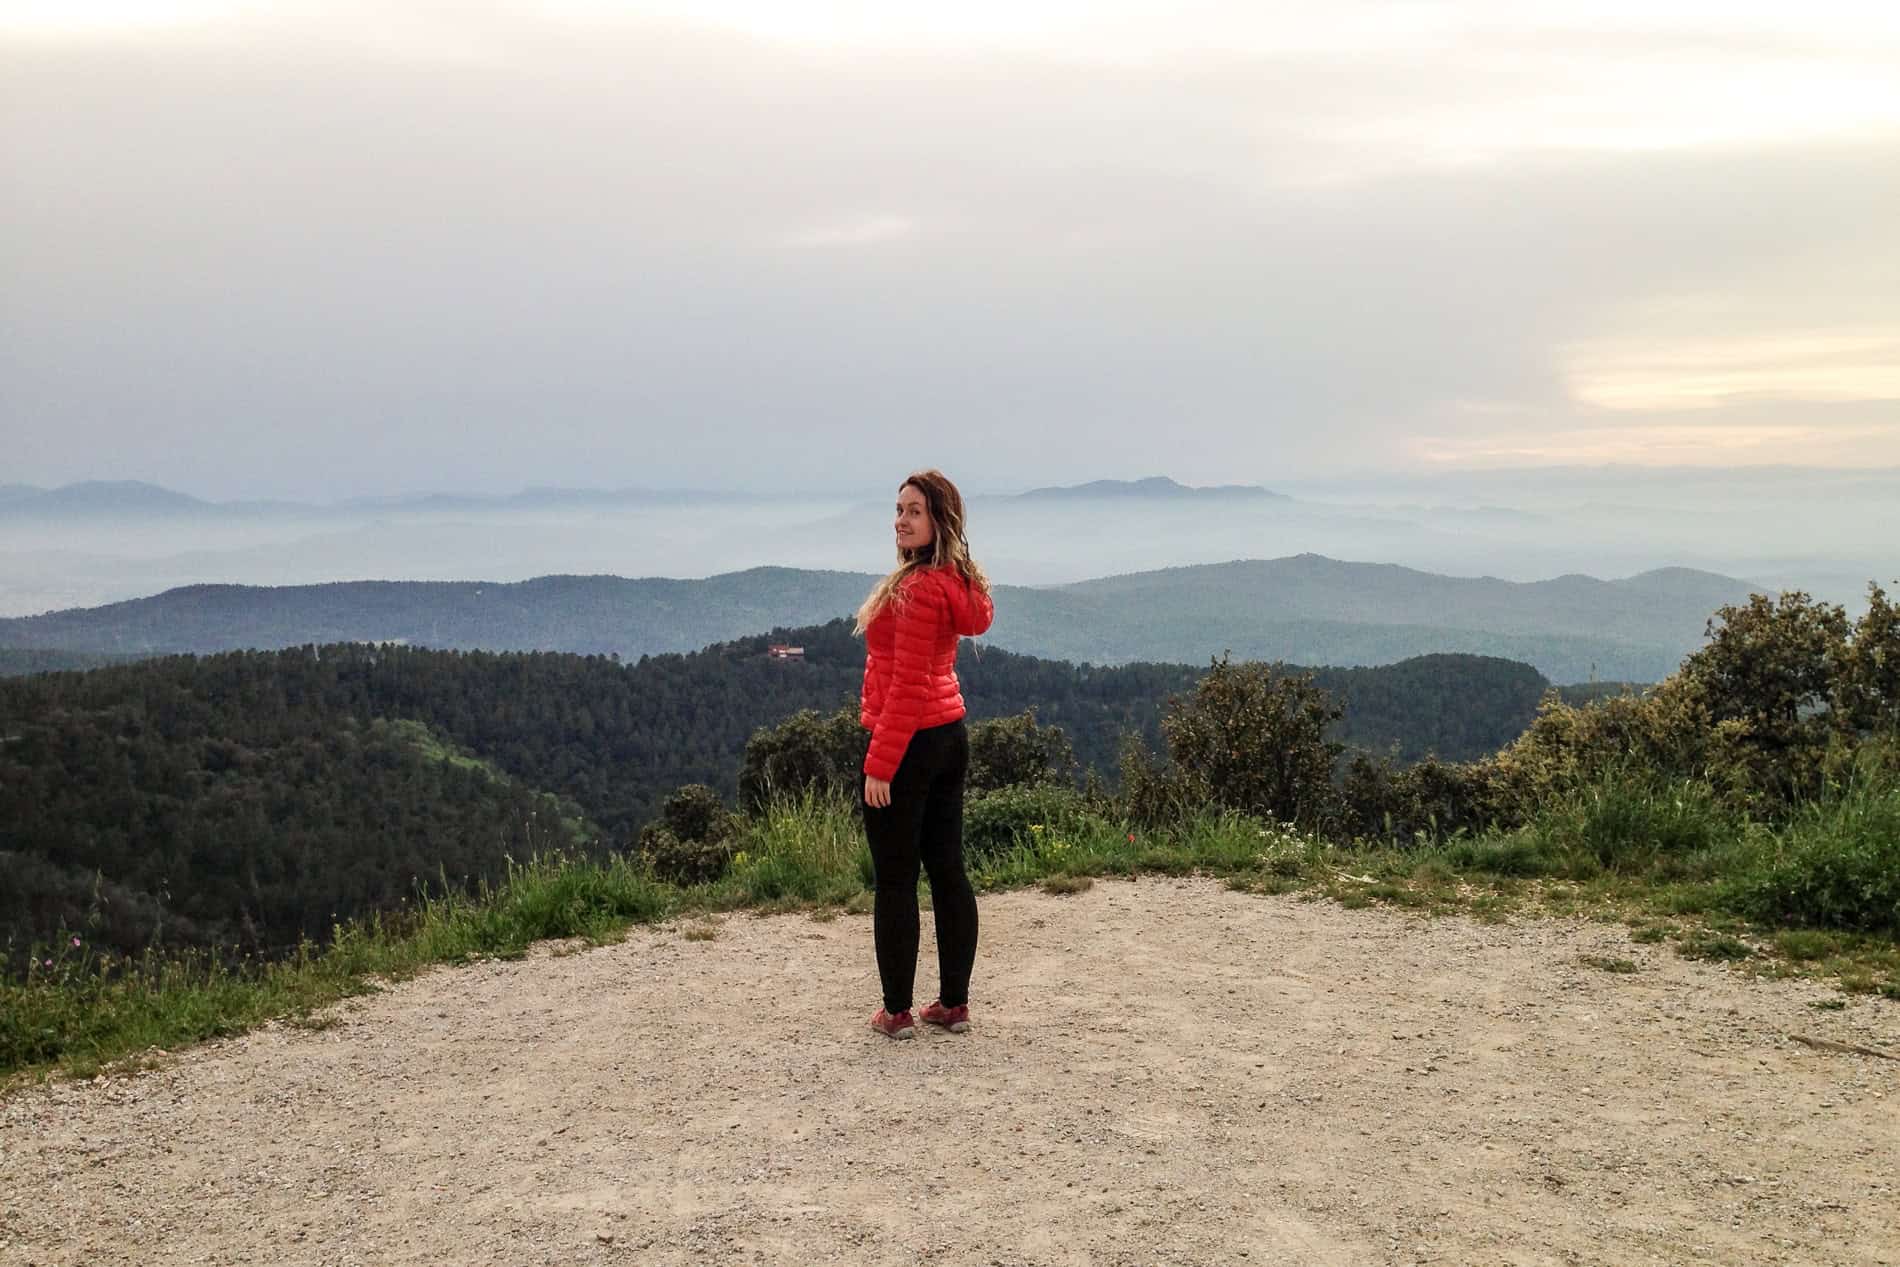 A woman in a red jacket stands on a mountain ledge overlooking the green, coastal, Costa Brava valley.